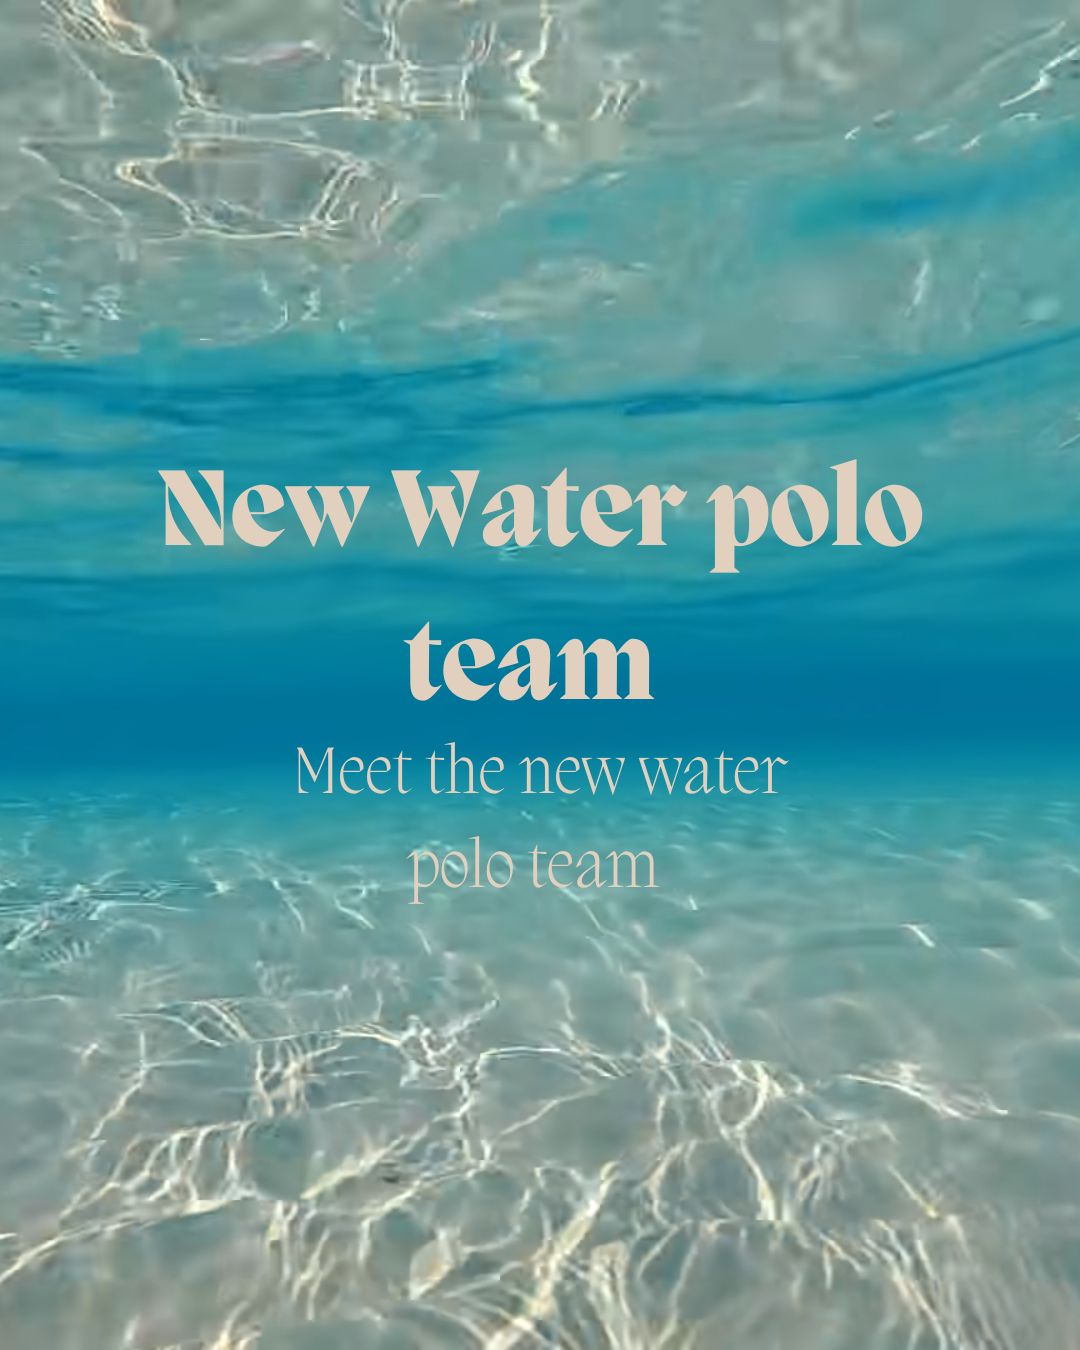 Salem High School and Princess Anne High School Combine to Form Water Polo Team